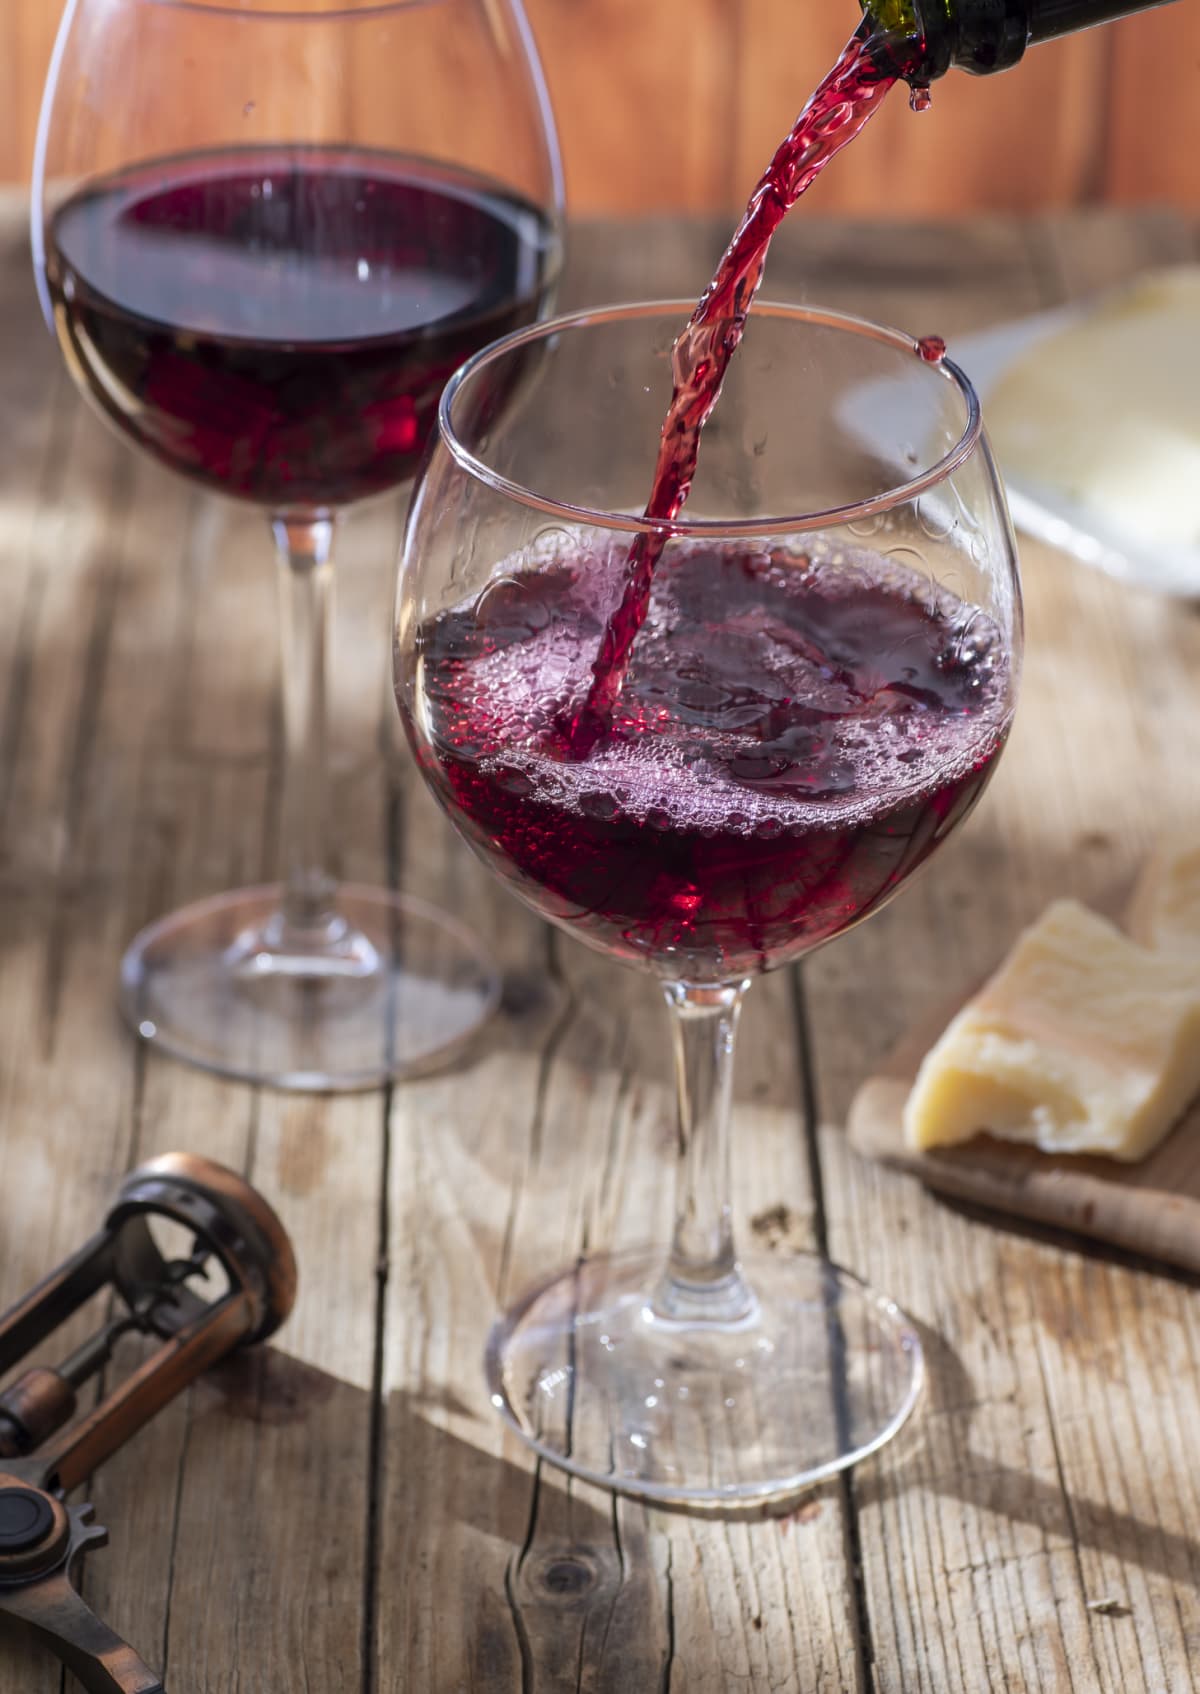 Pouring red wine into a glass on a wooden table